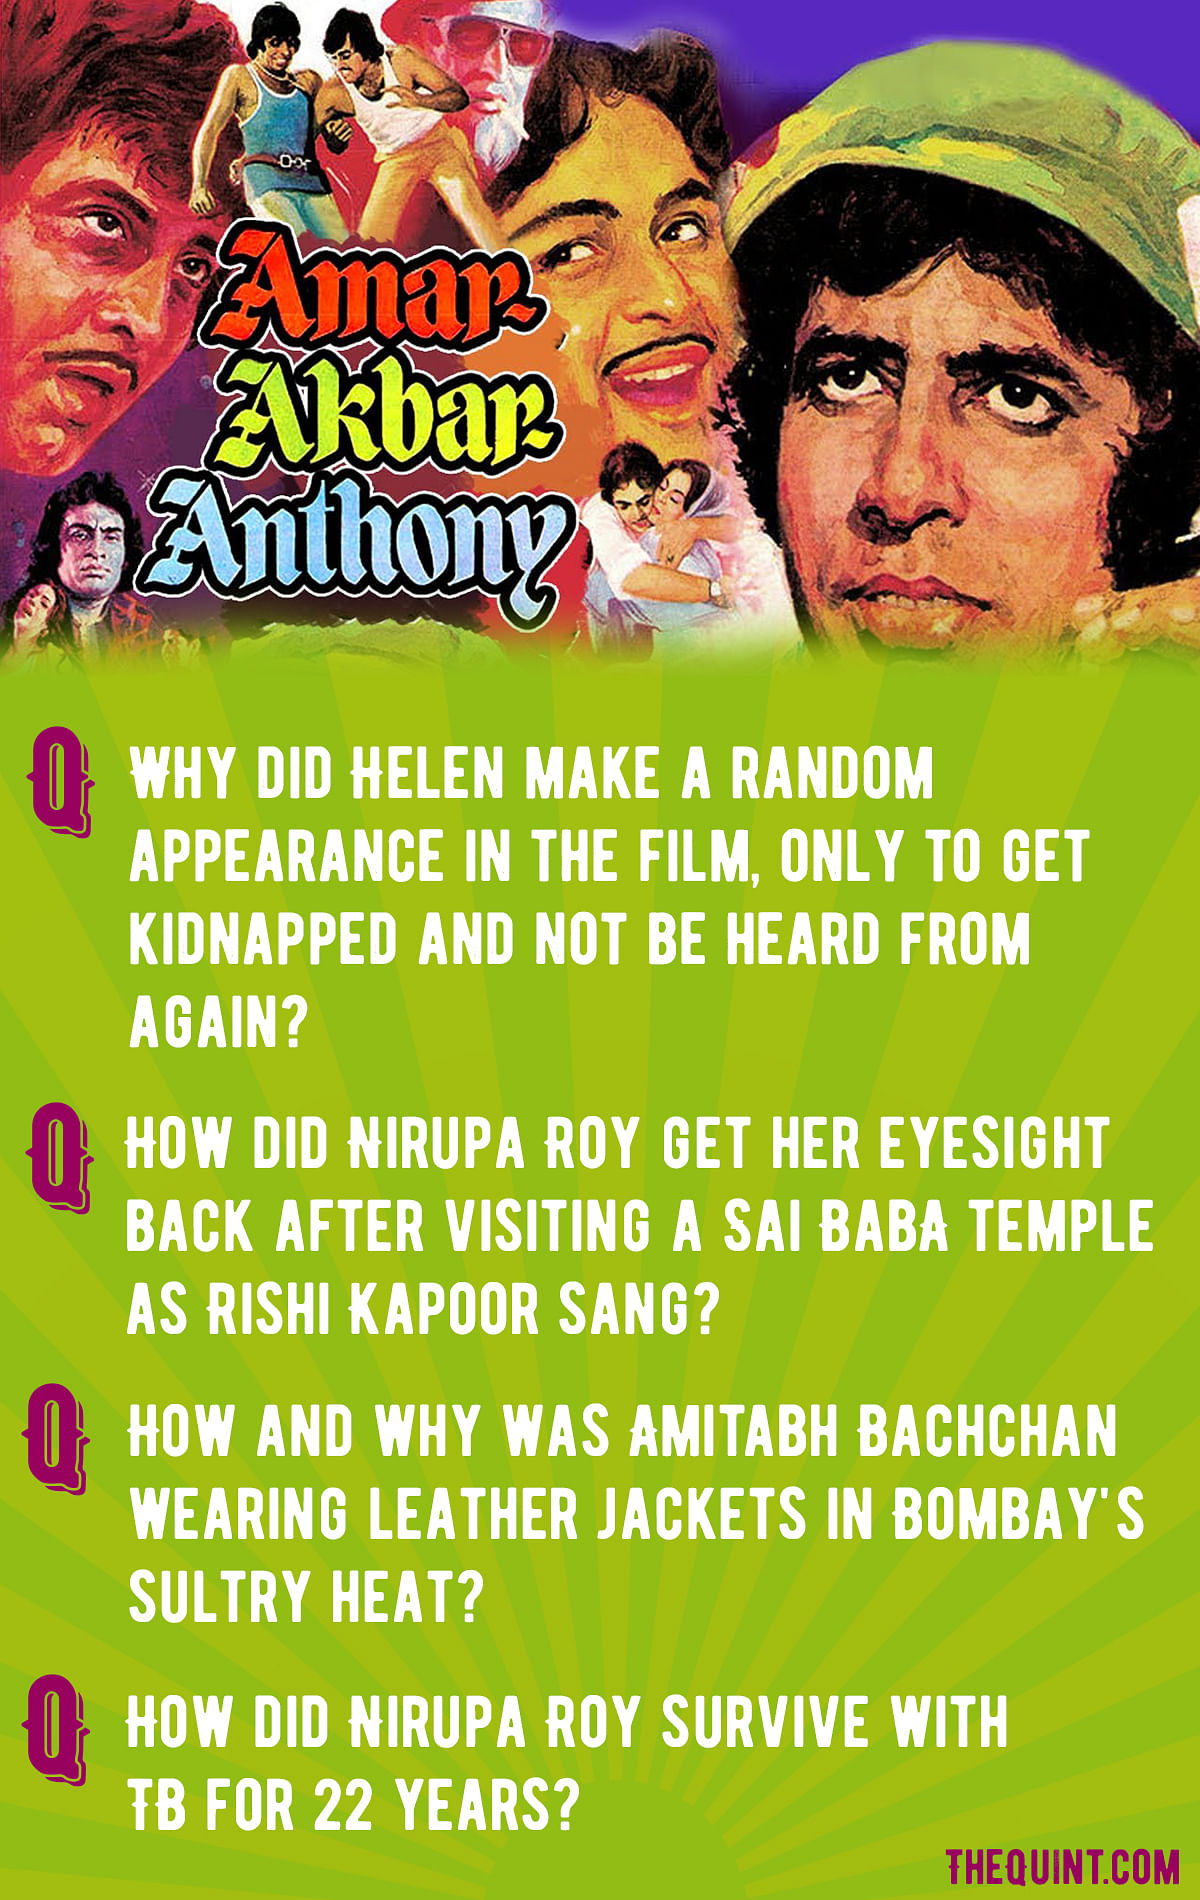 ‘Amar Akbar Anthony’ could have ended in 15 minutes, if all the characters had phones like now.